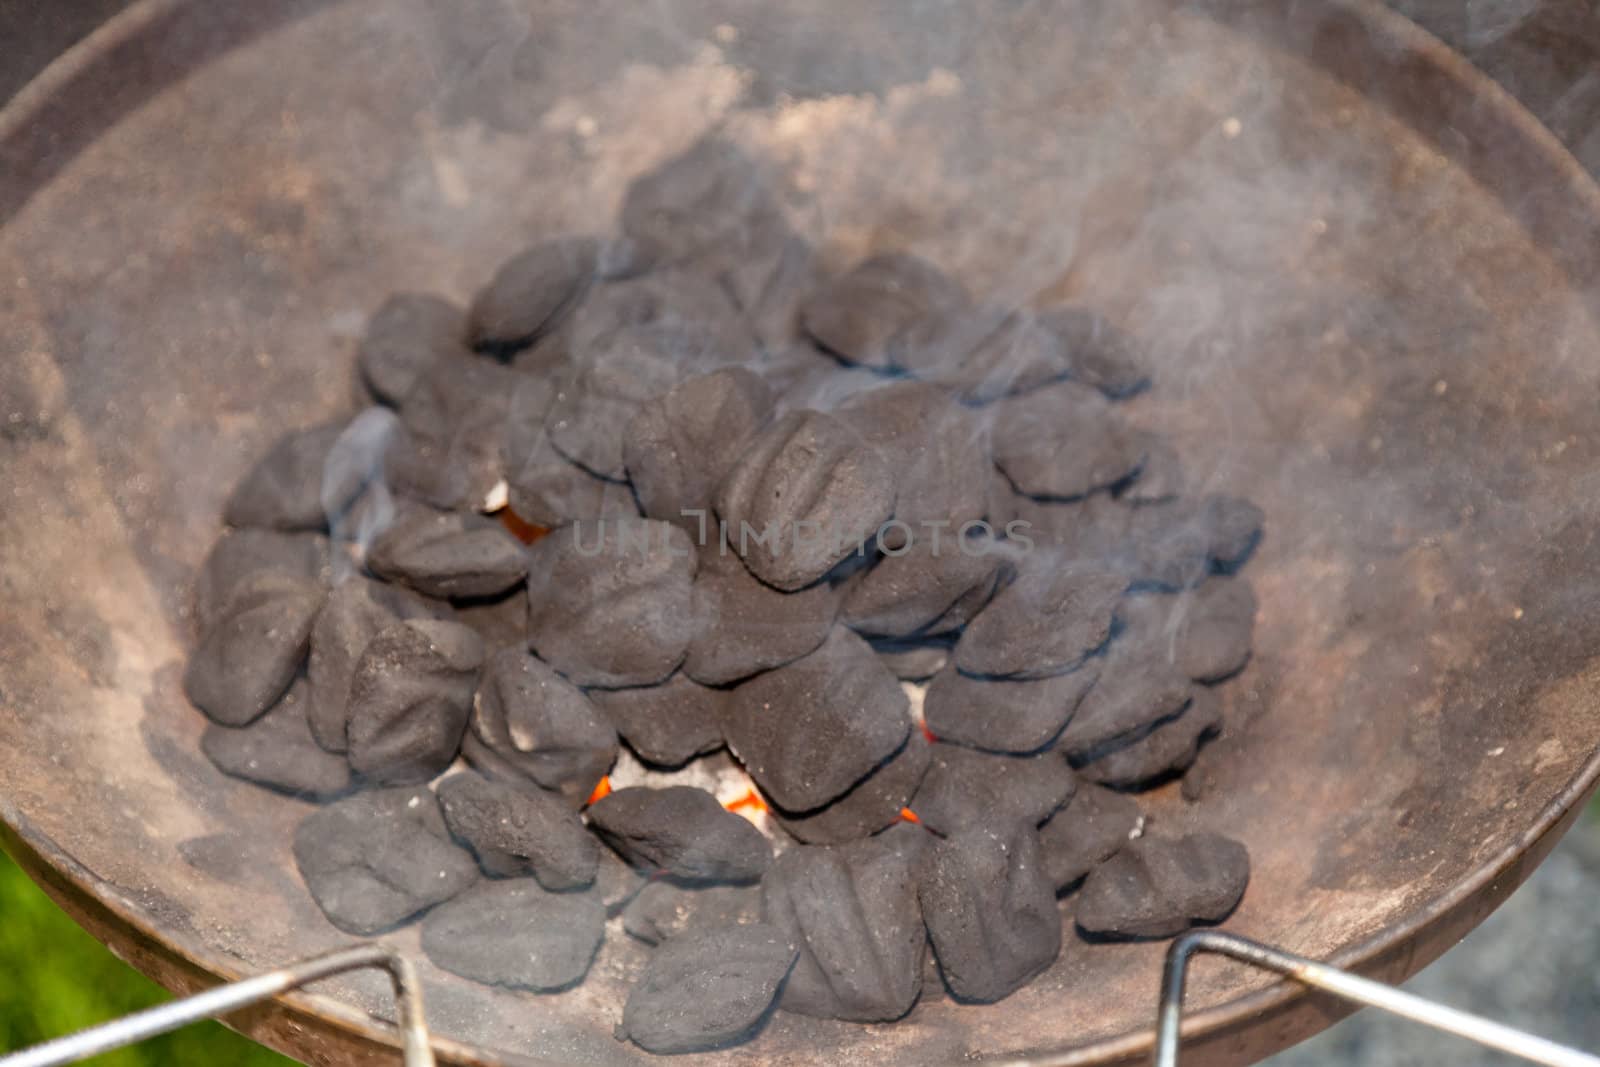 Charcoal briquettes by melastmohican